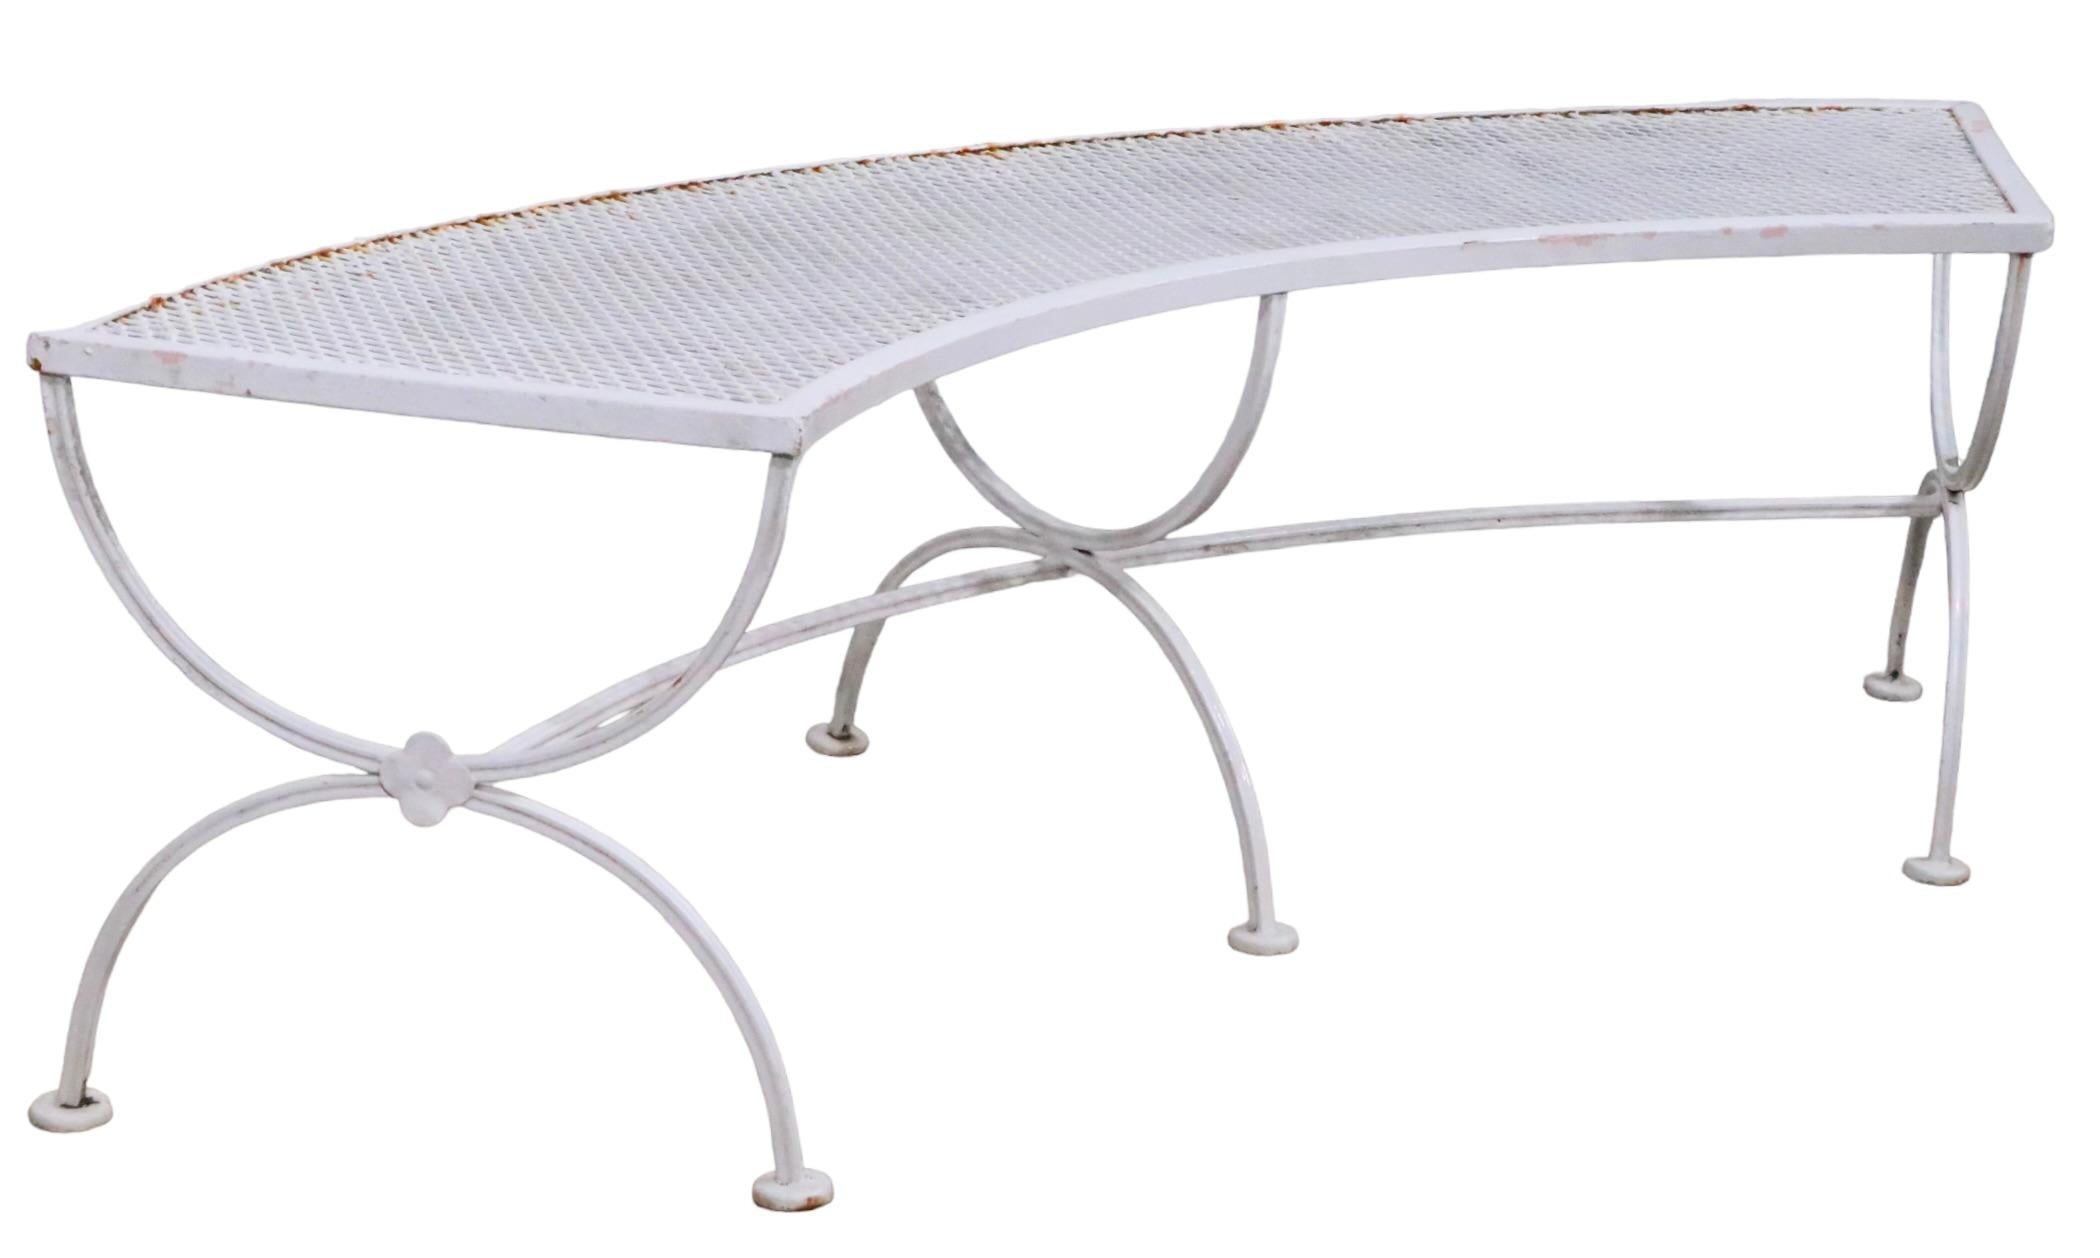 Curved wrought iron and metal mesh bench(s) by Salterini, three available. The benches feature U shaped legs, of wrought iron, which support the curved  metal mesh tops.  This desirable form is hard to find, especially hard to find in sets. Priced